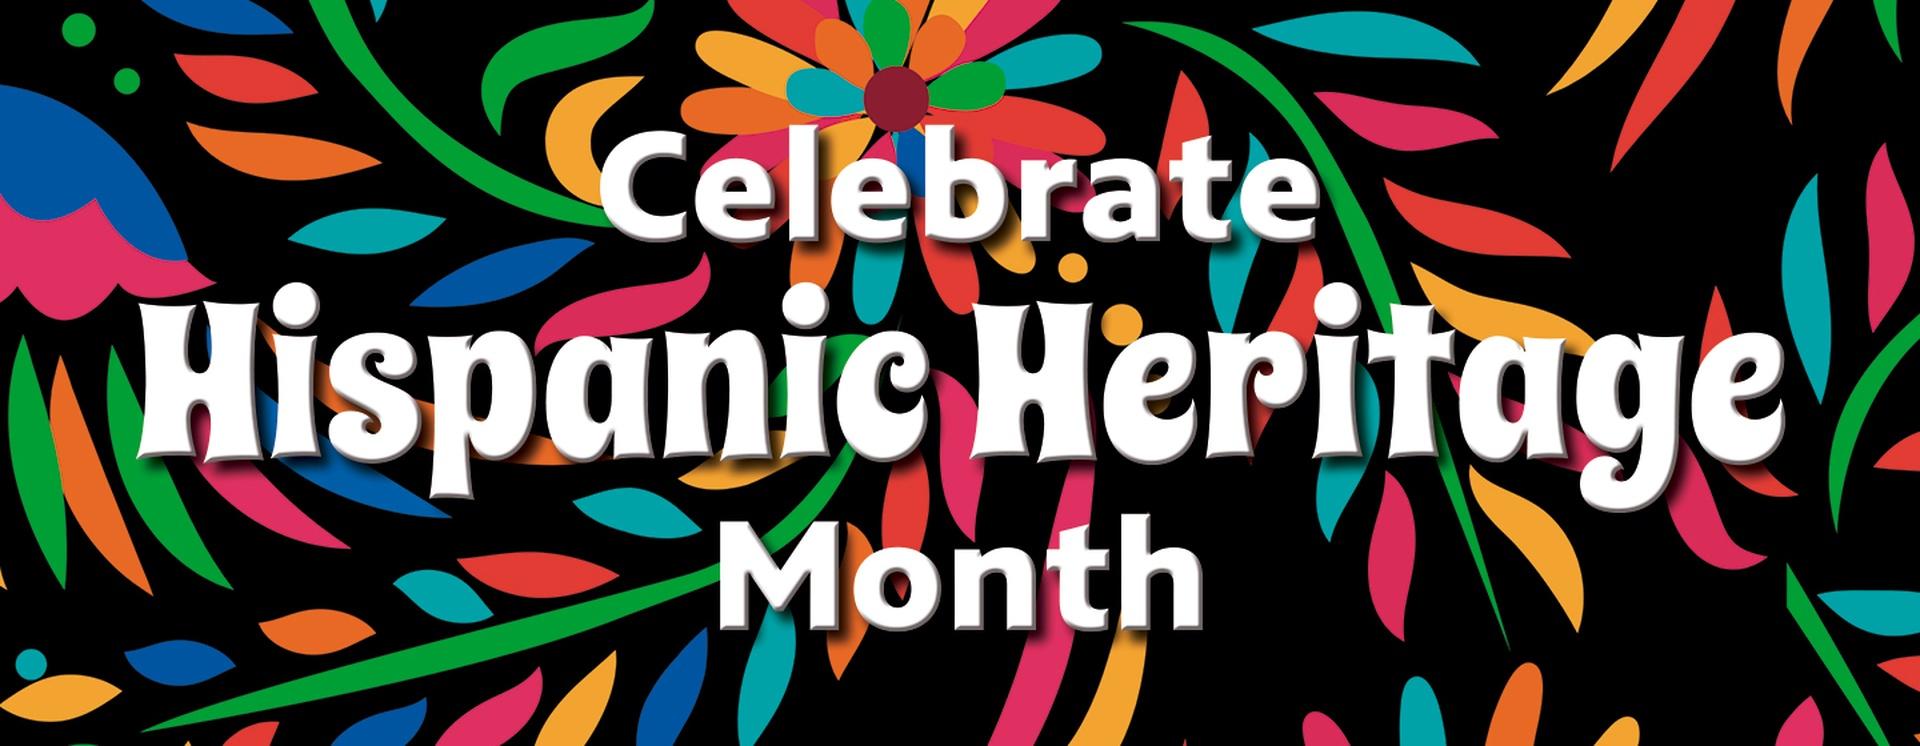 PBS Western Reserve celebrates Hispanic Heritage Month this September and October.